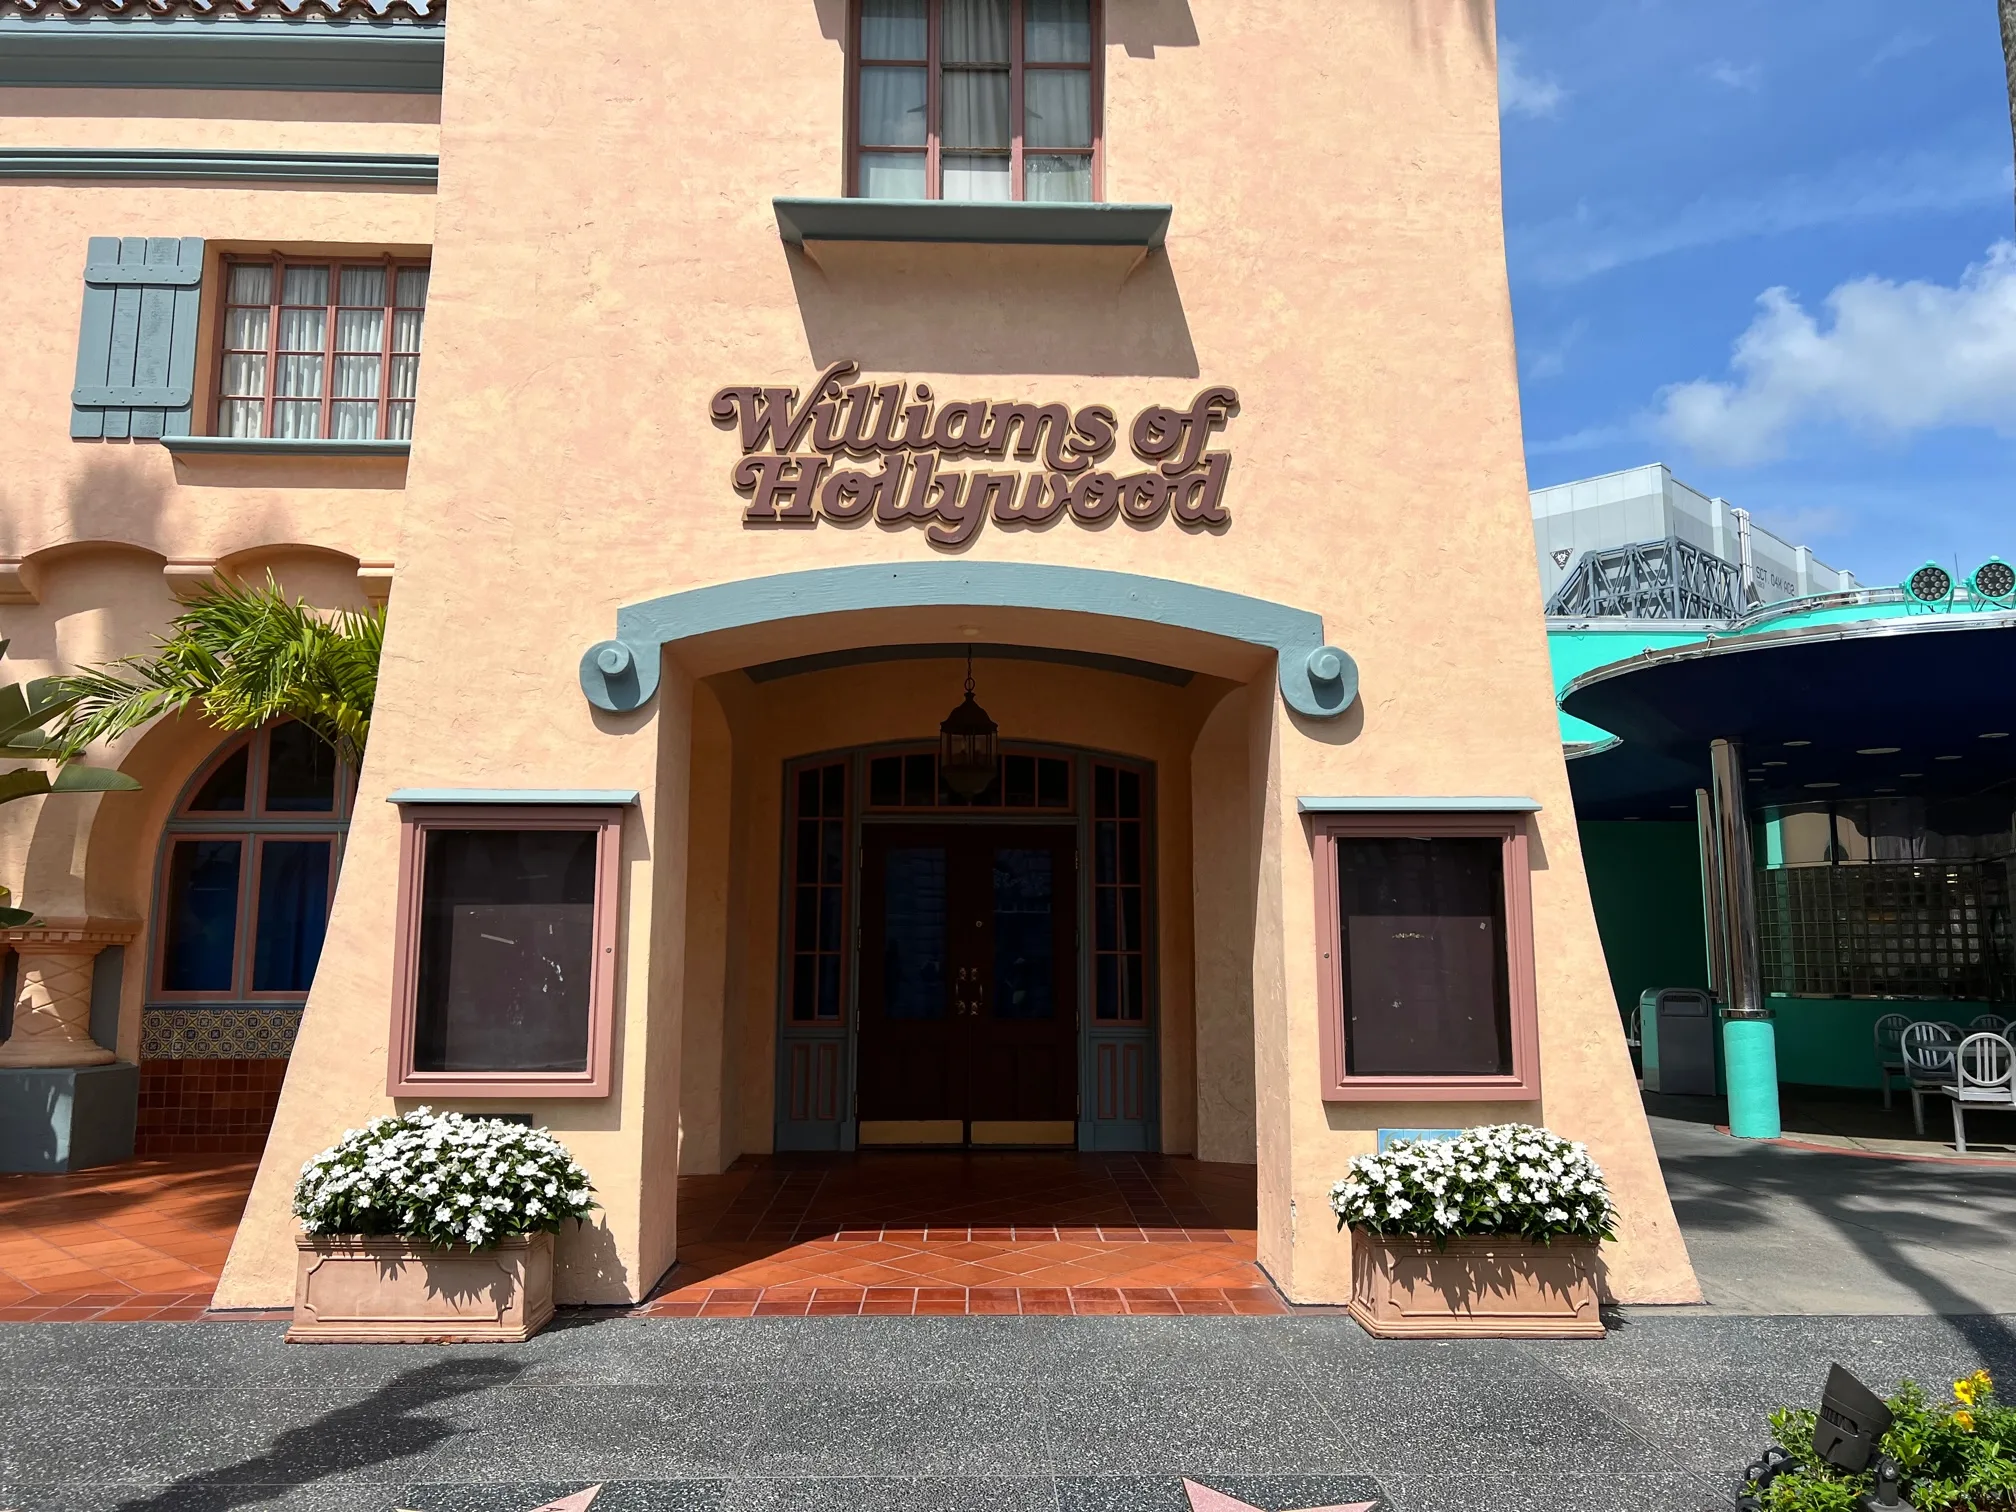 Williams of Hollywood Prop Shop officially closes at Universal Studios Florida